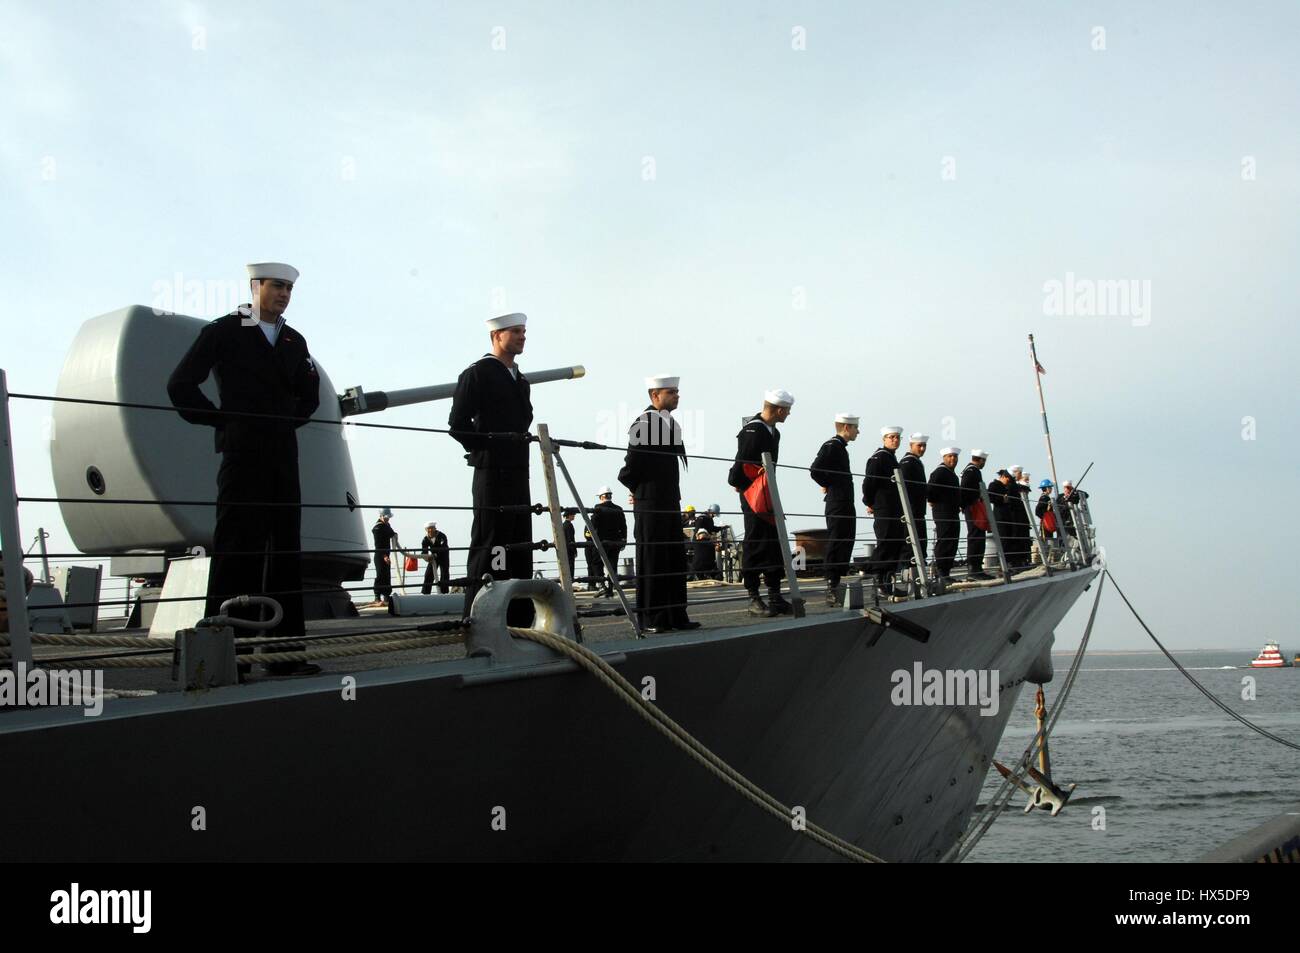 Sailors prepare to get underway aboard the guided-missile destroyer USS Barry, Norfolk, Virginia, 2013. Image courtesy US Navy. Stock Photo